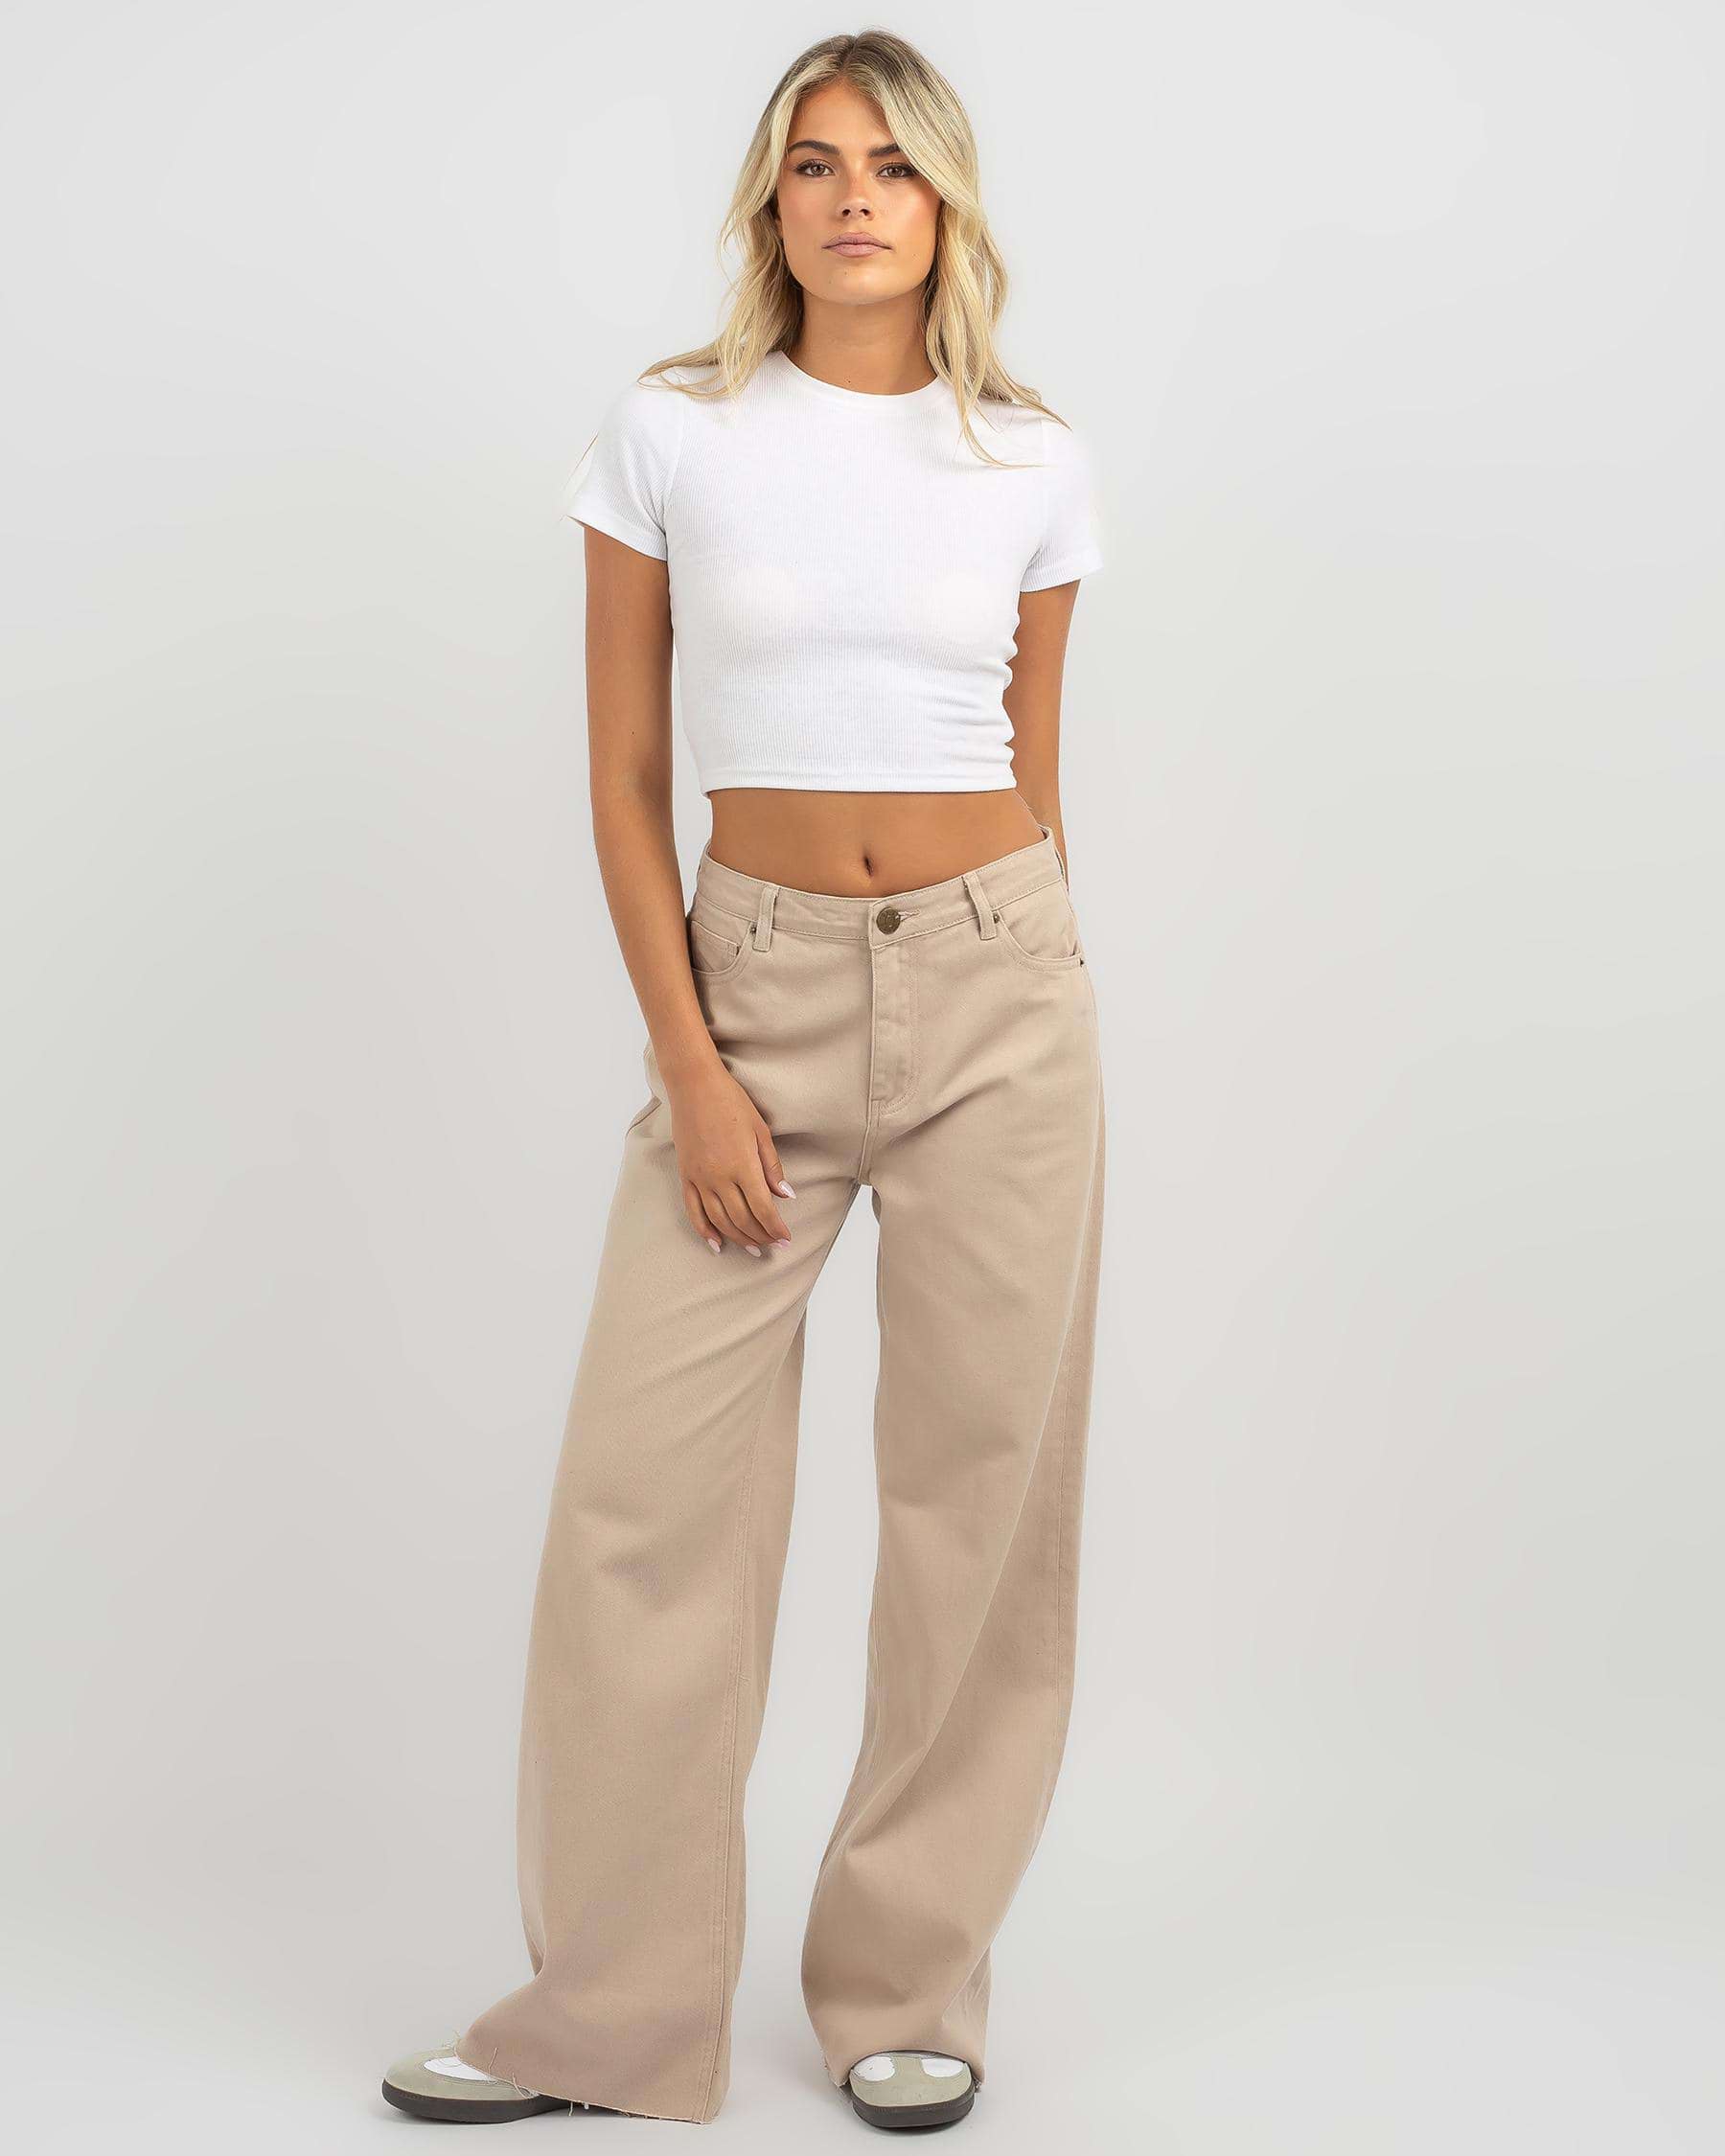 DESU Willow Wide Leg Jeans In Latte - FREE* Shipping & Easy Returns ...